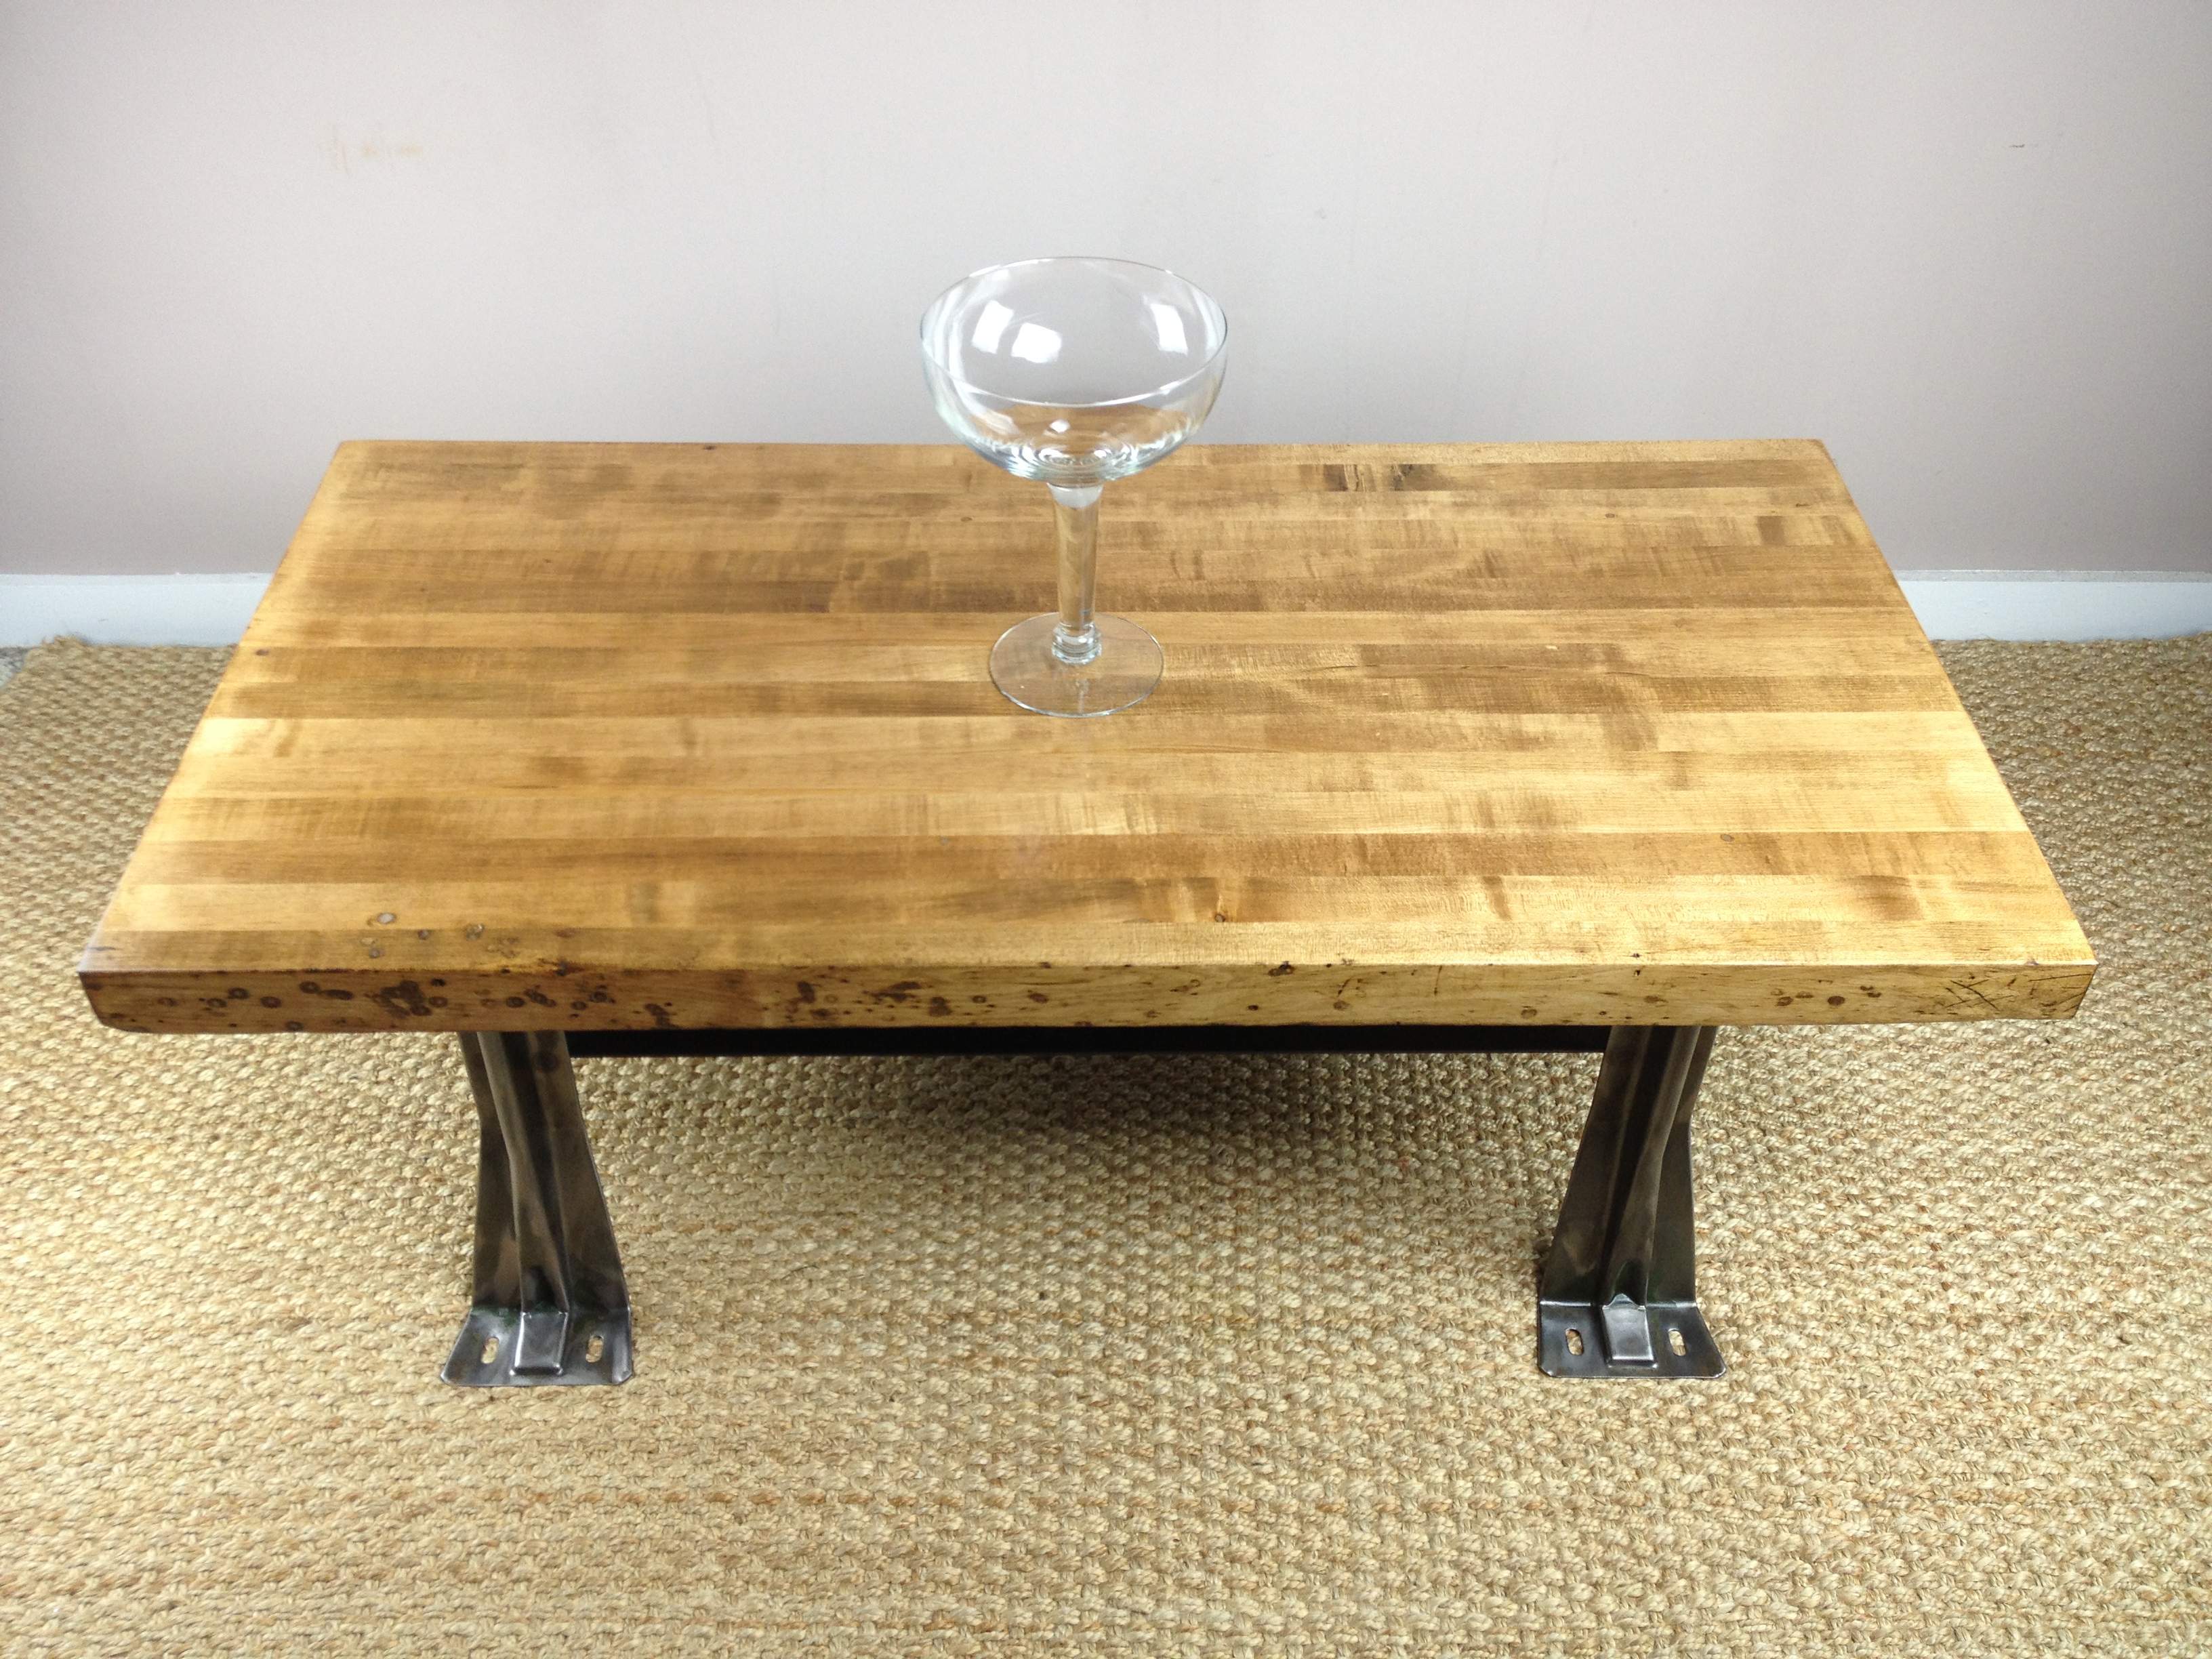 DIY Custom Square Low Coffee Table Using Reclaimed Wood Top And ...